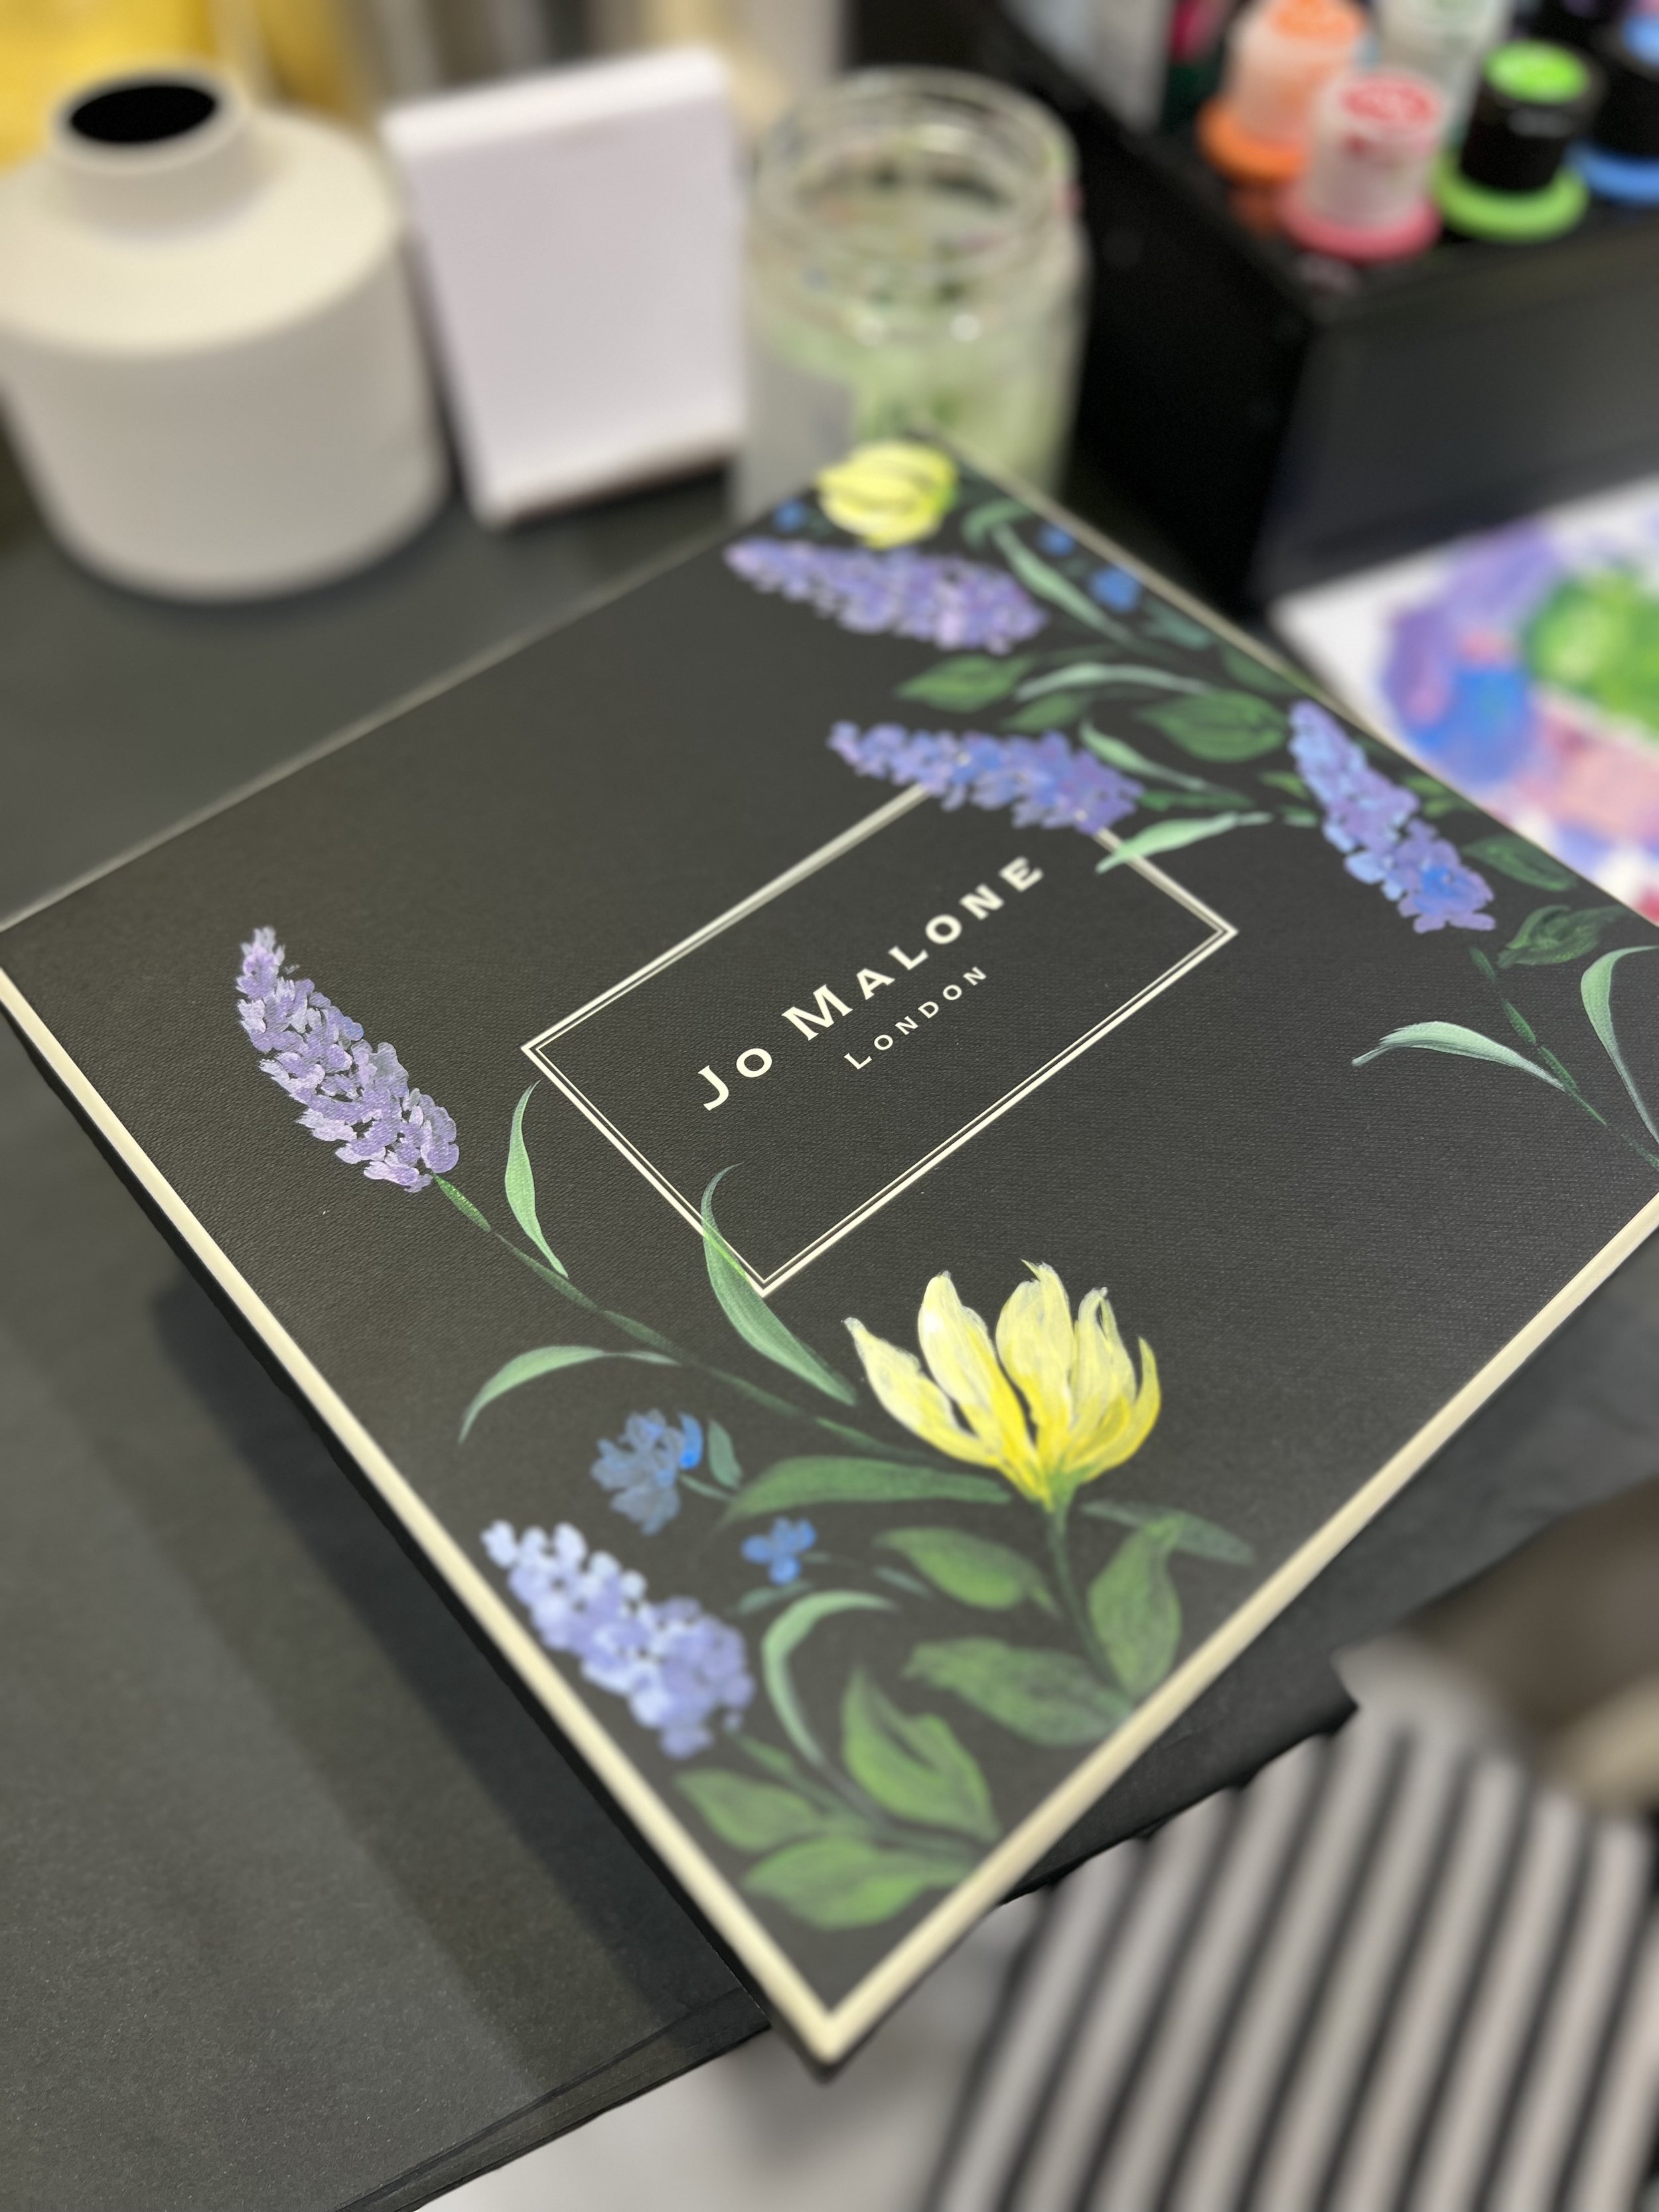 purple-and-yellow-flower-painting-on-jo-malone-box-for-media-event.jpeg